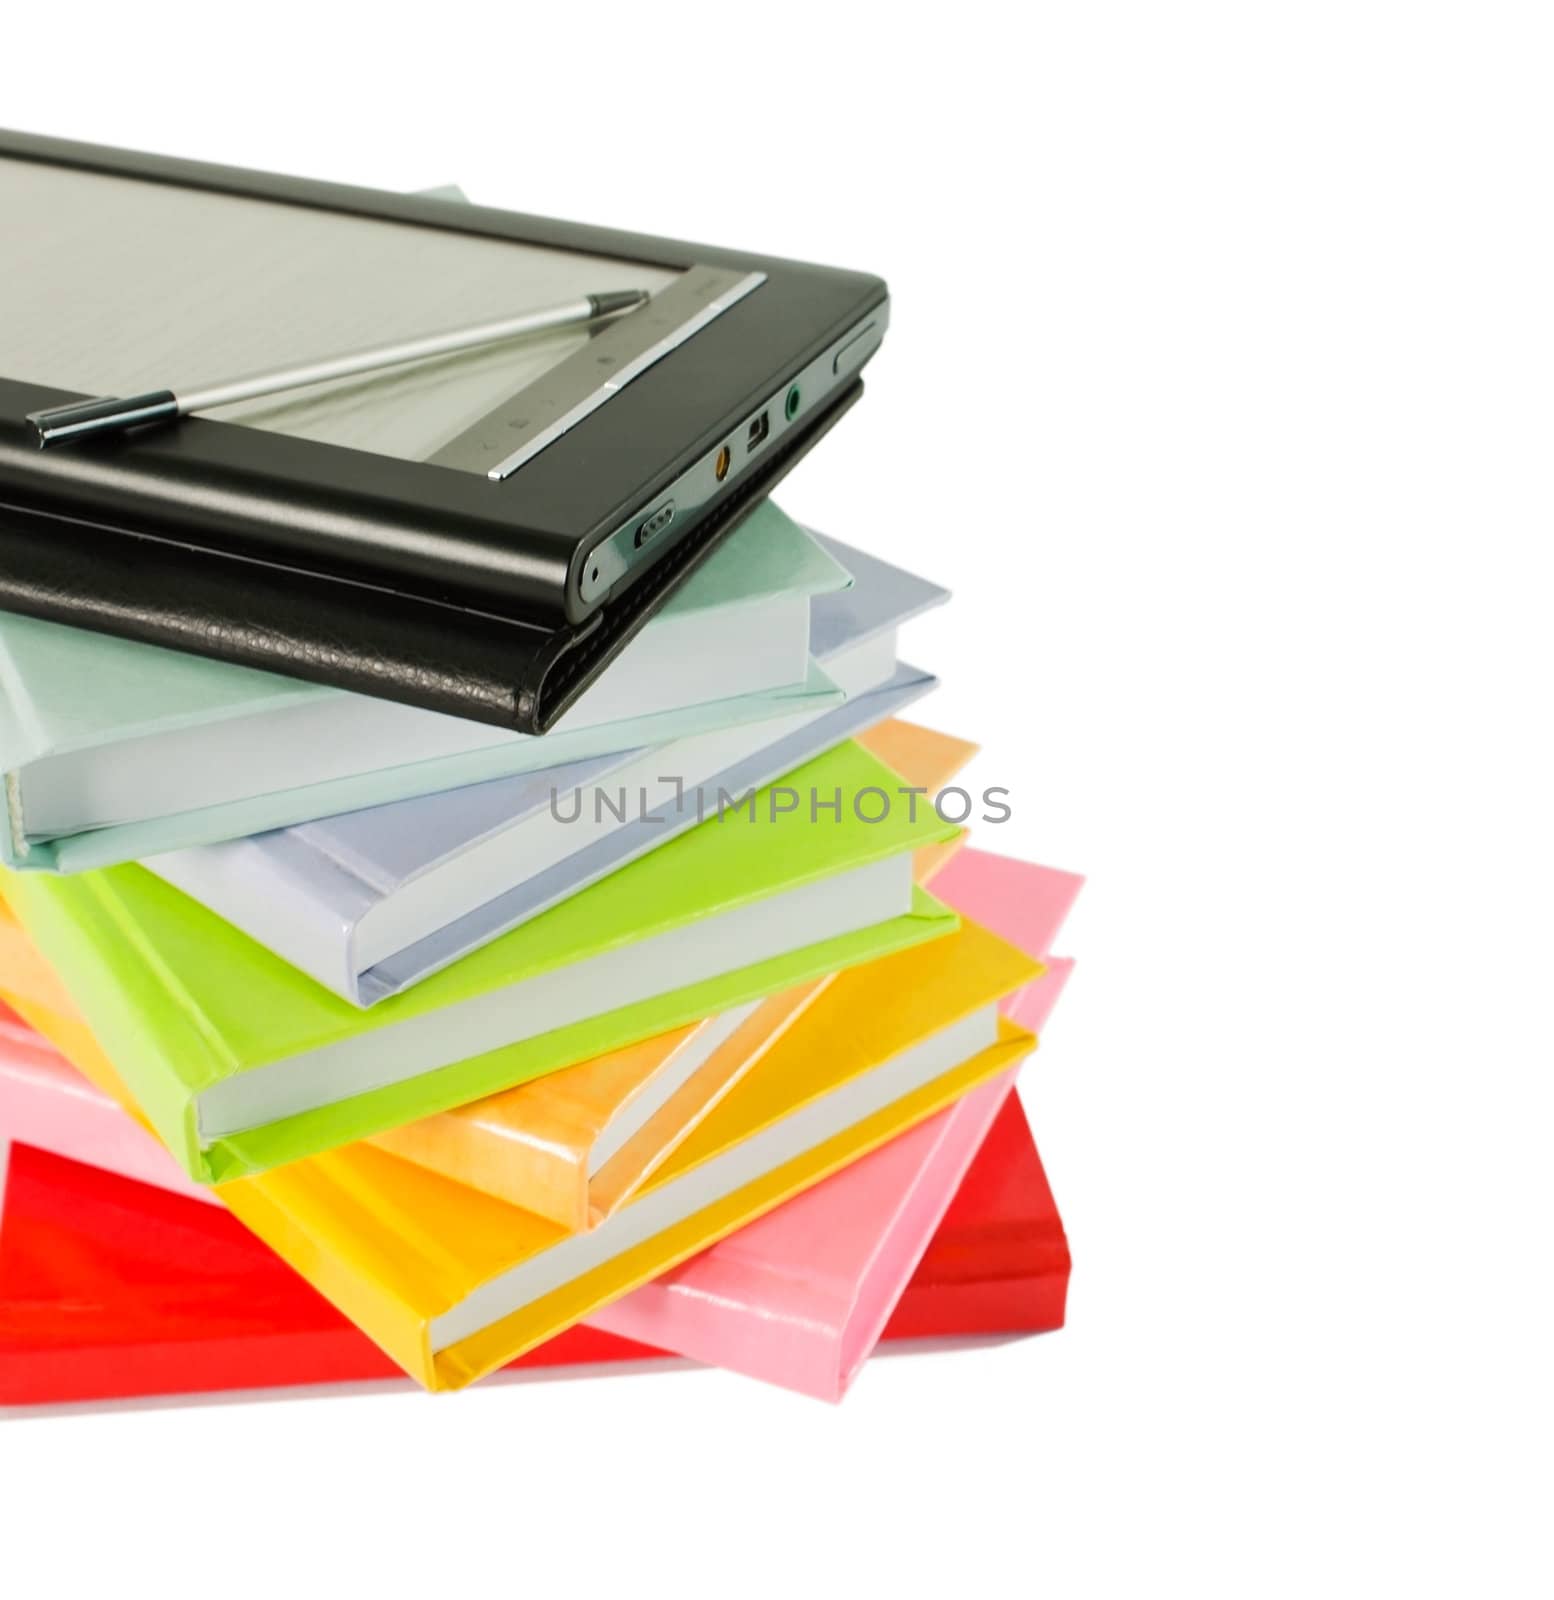 Stack of colorful books and electronic book reader on the white background